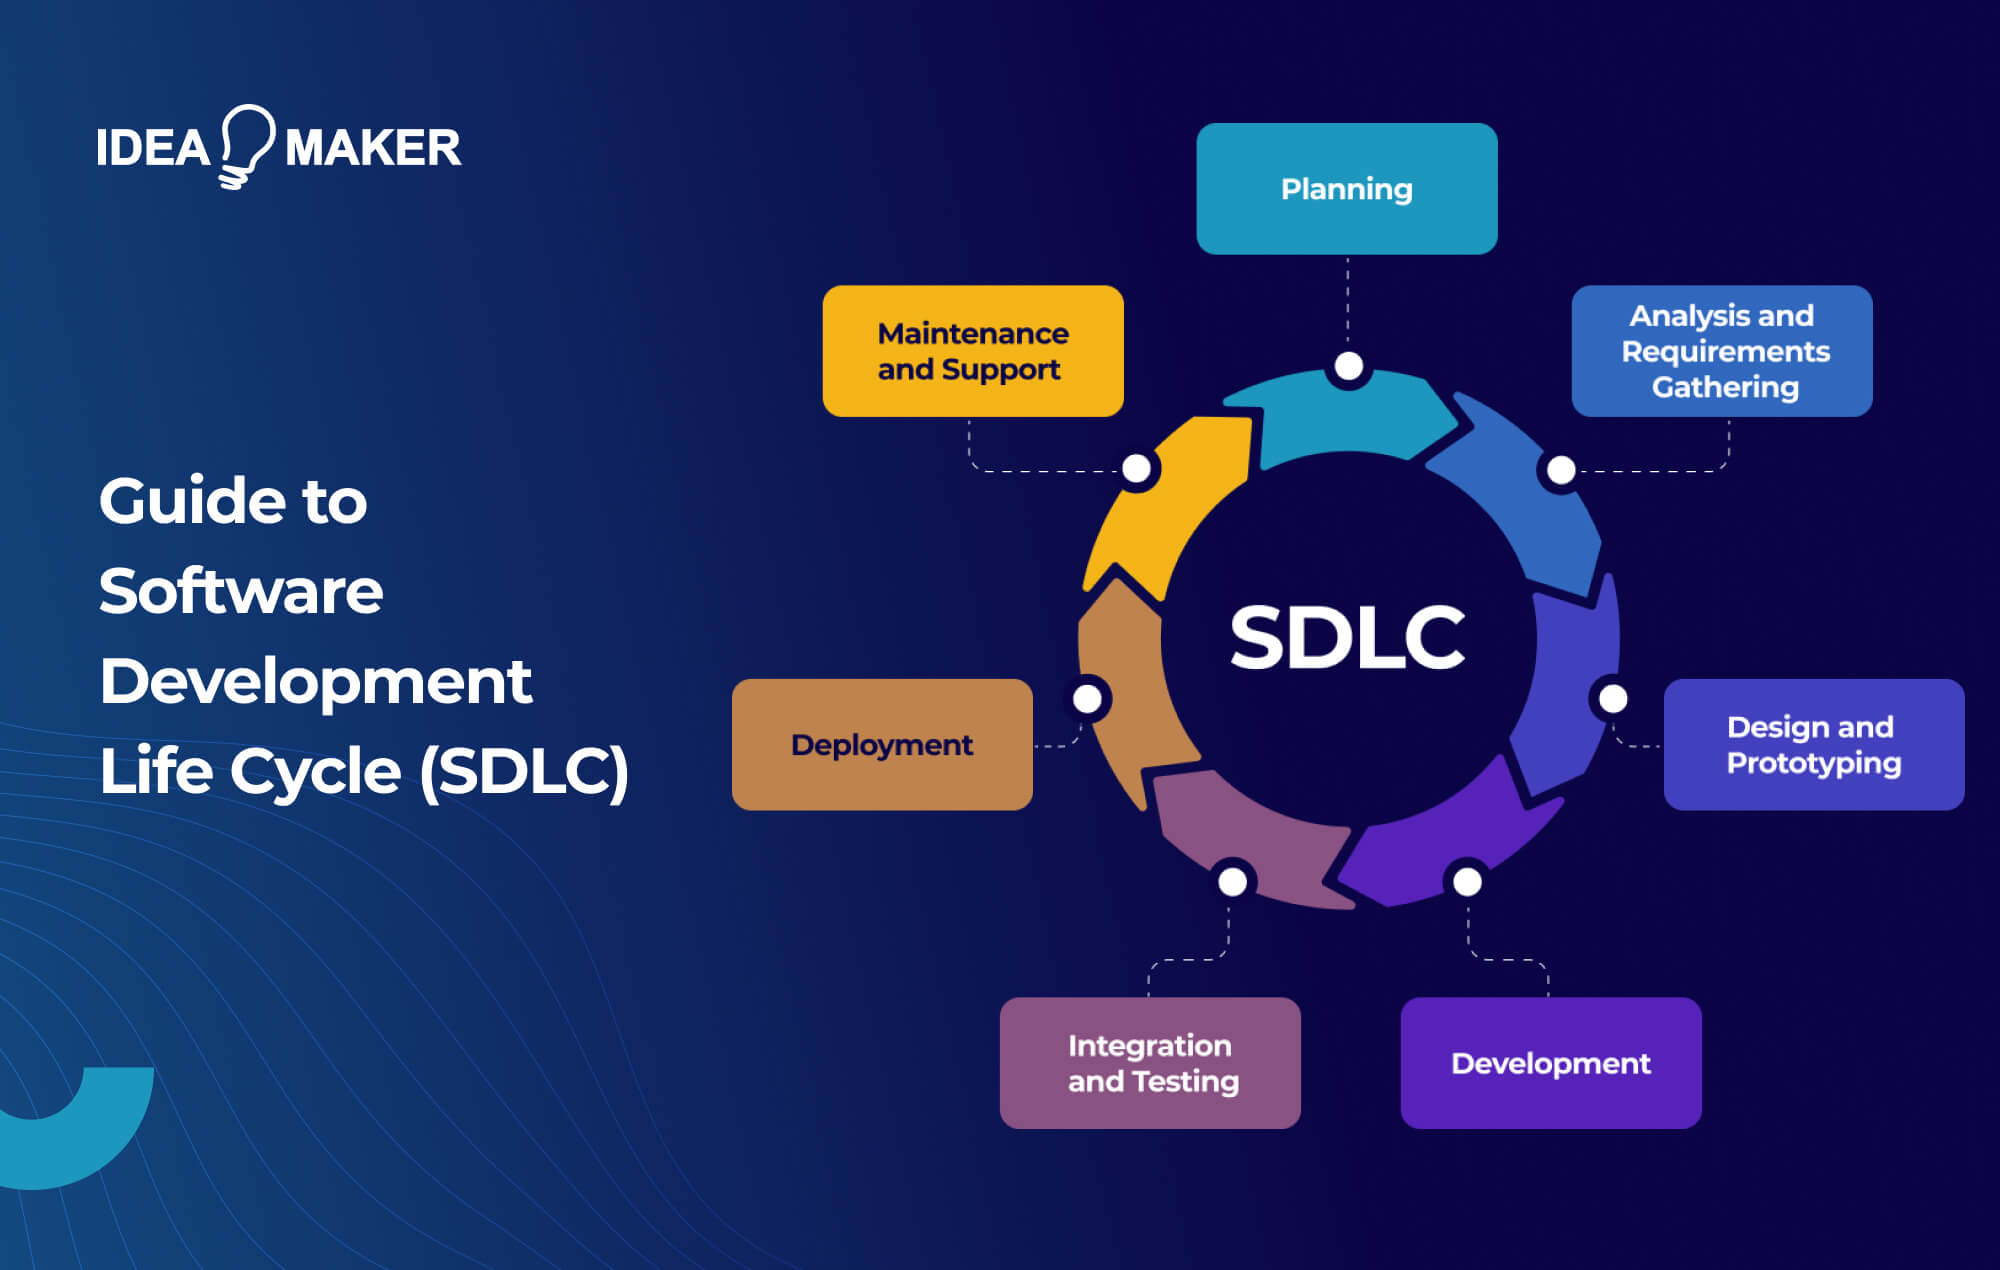 Guide to the Software Development Life Cycle (SDLC)